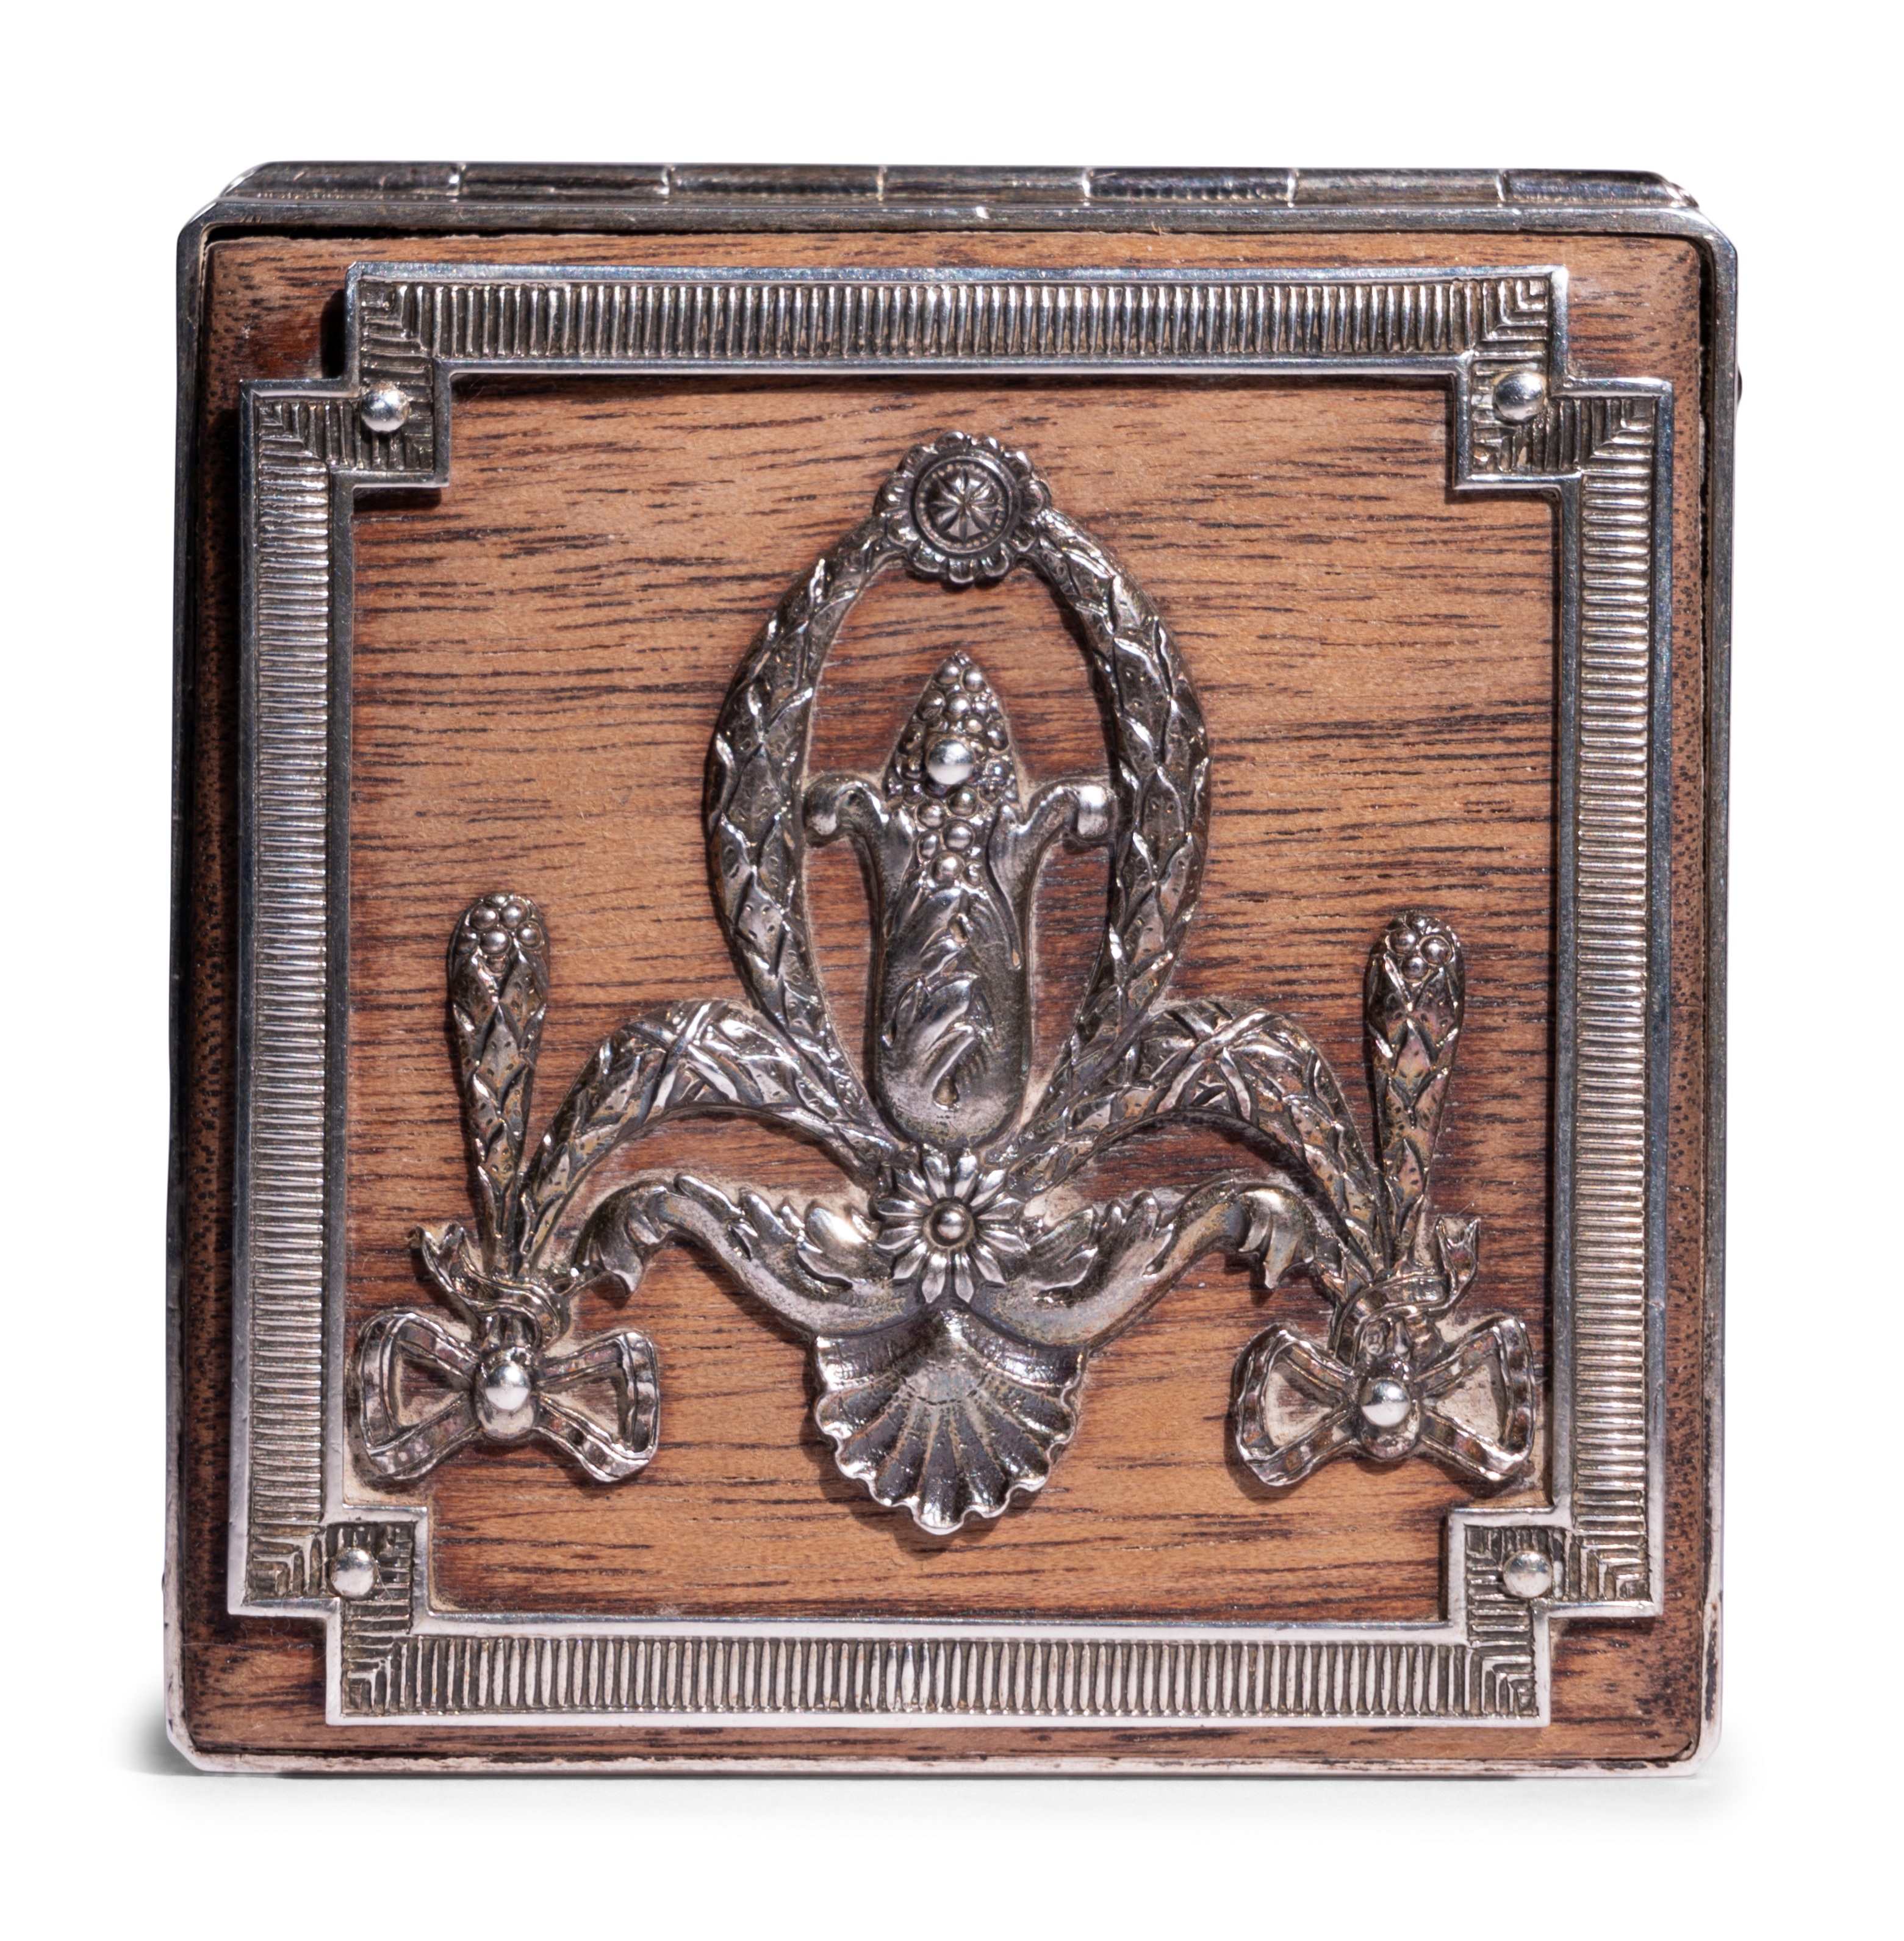 A Faberge Silver-Mounted Rosewood Stamp Box - Image 3 of 9